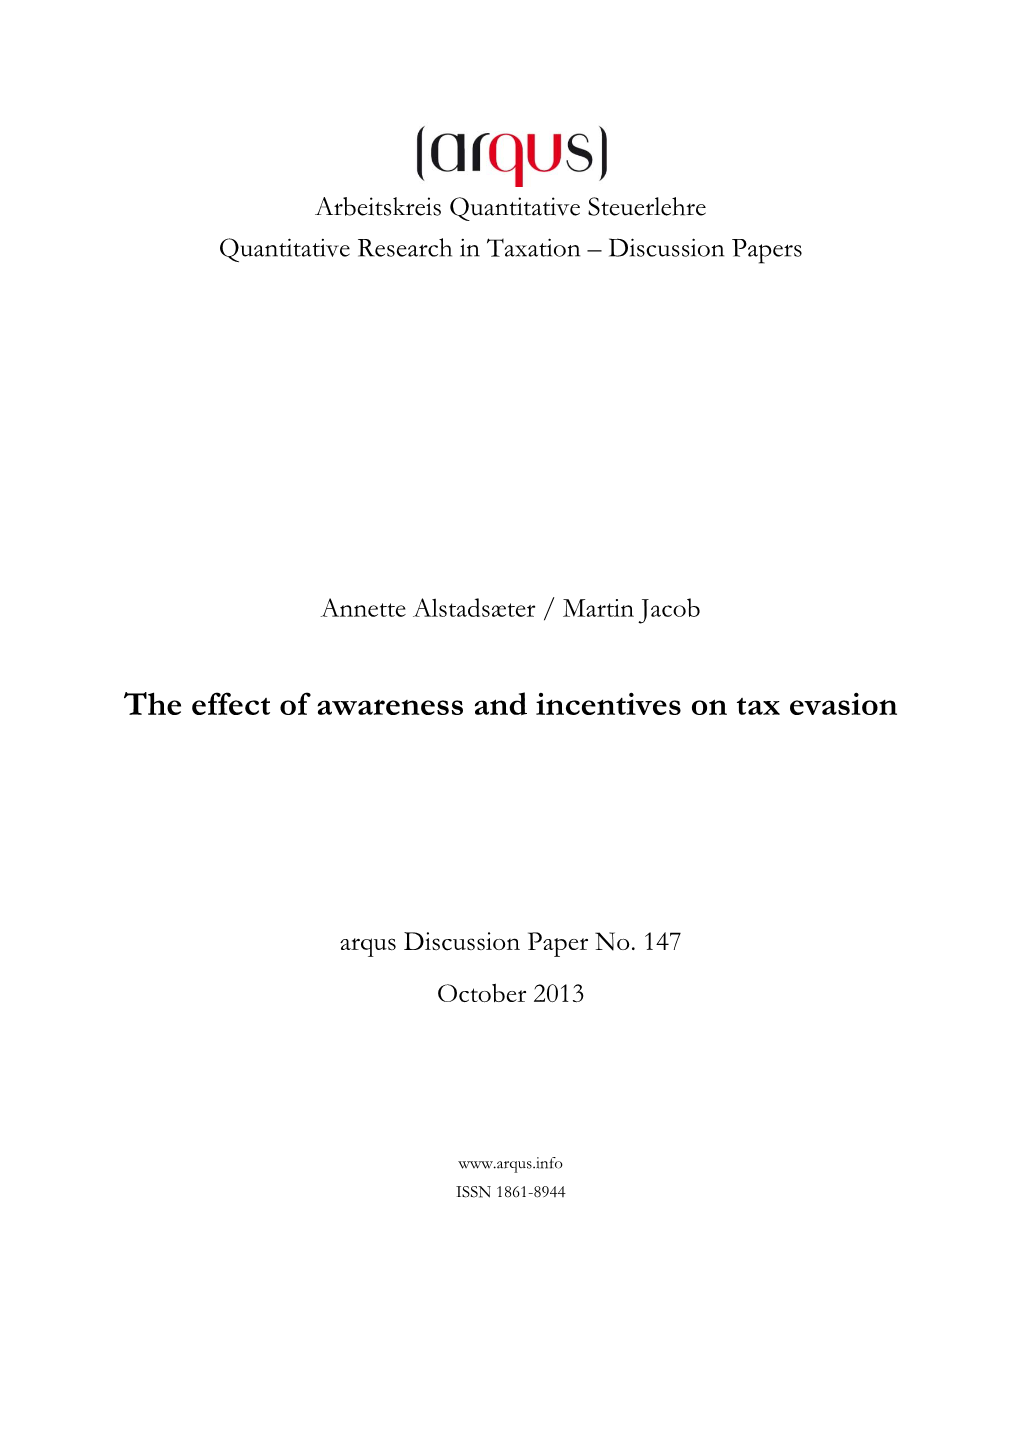 The Effect of Awareness and Incentives on Tax Evasion